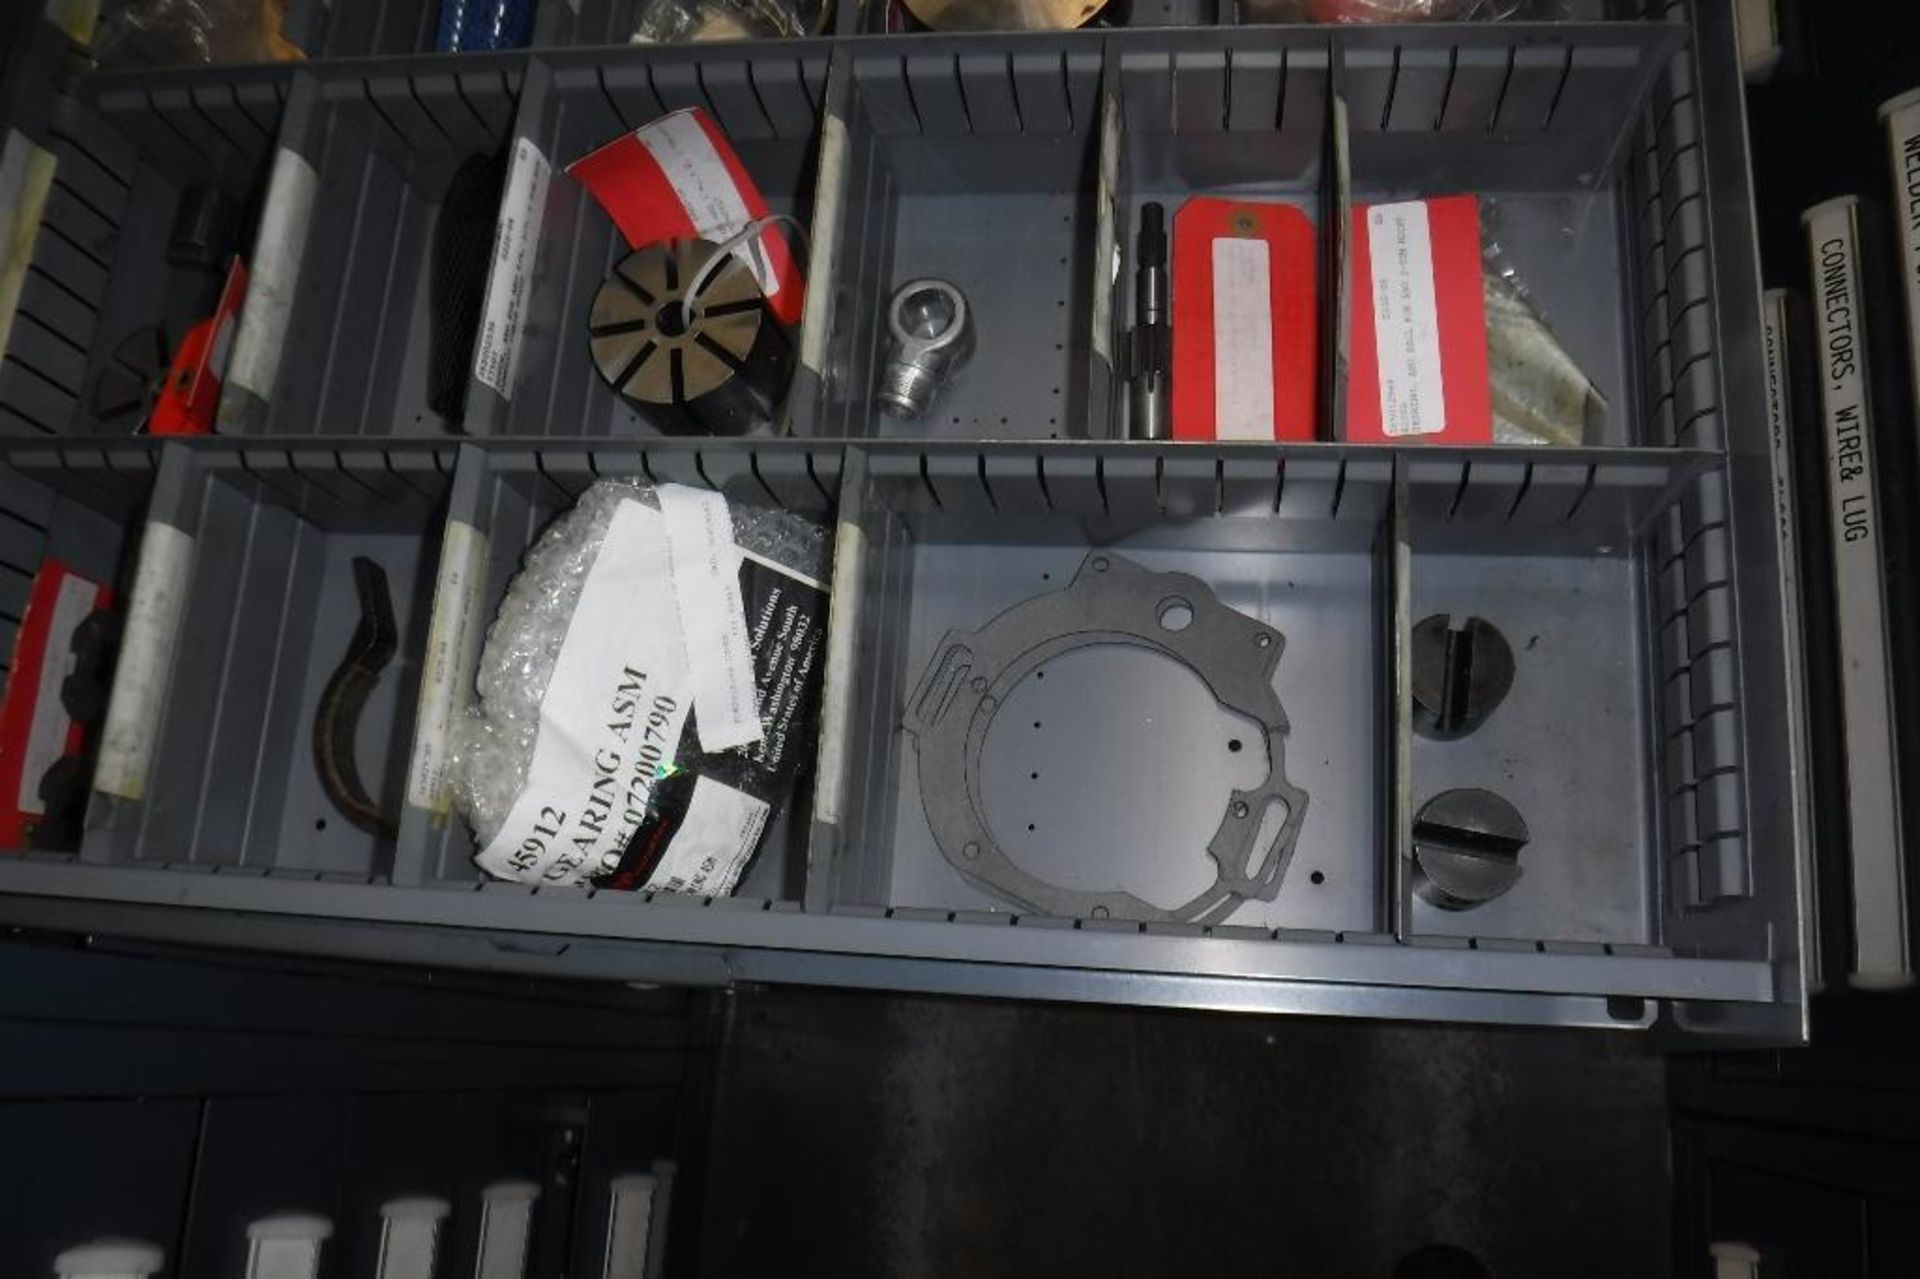 9-Drawer Vidmar Cabinet with Contents-Graco Parts,Hoist Parts,Pump Parts, MUST REMOVE BY 2/14/20-MUS - Image 7 of 12